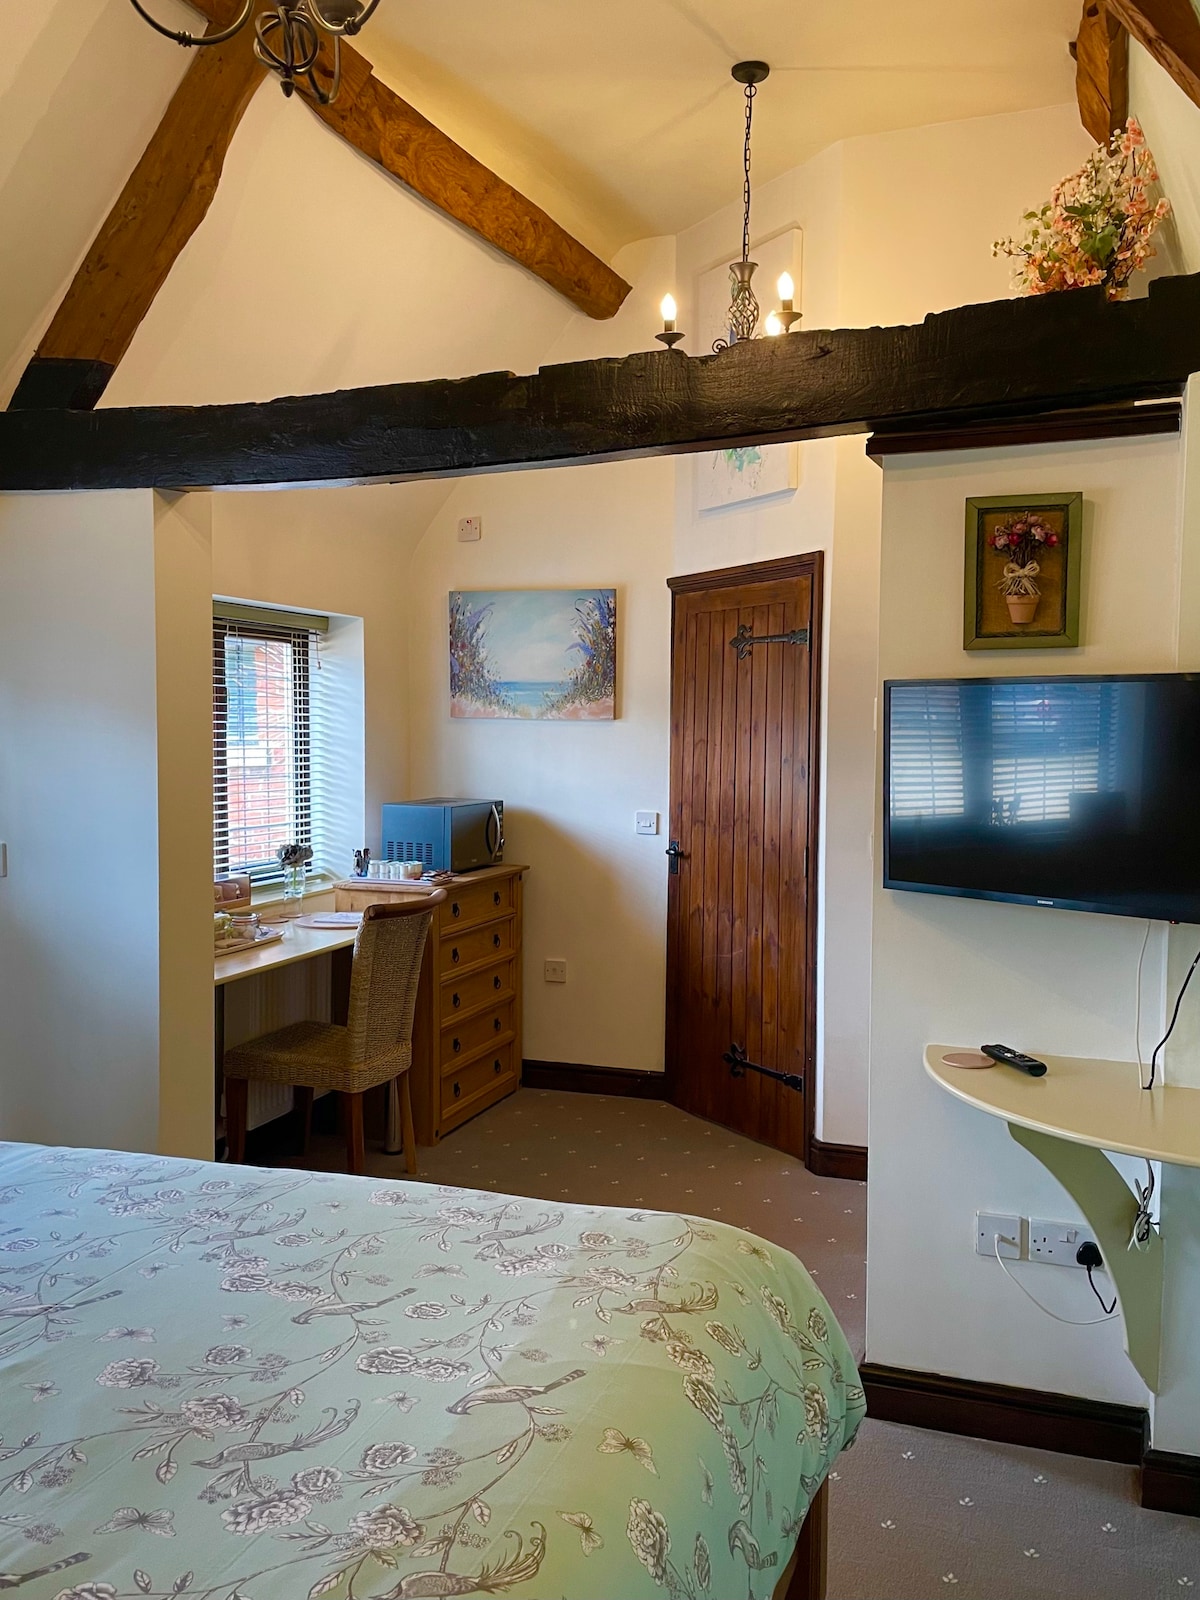 The Saddlery - Kingsize Deluxe - En-suite with shower - Courtyard view